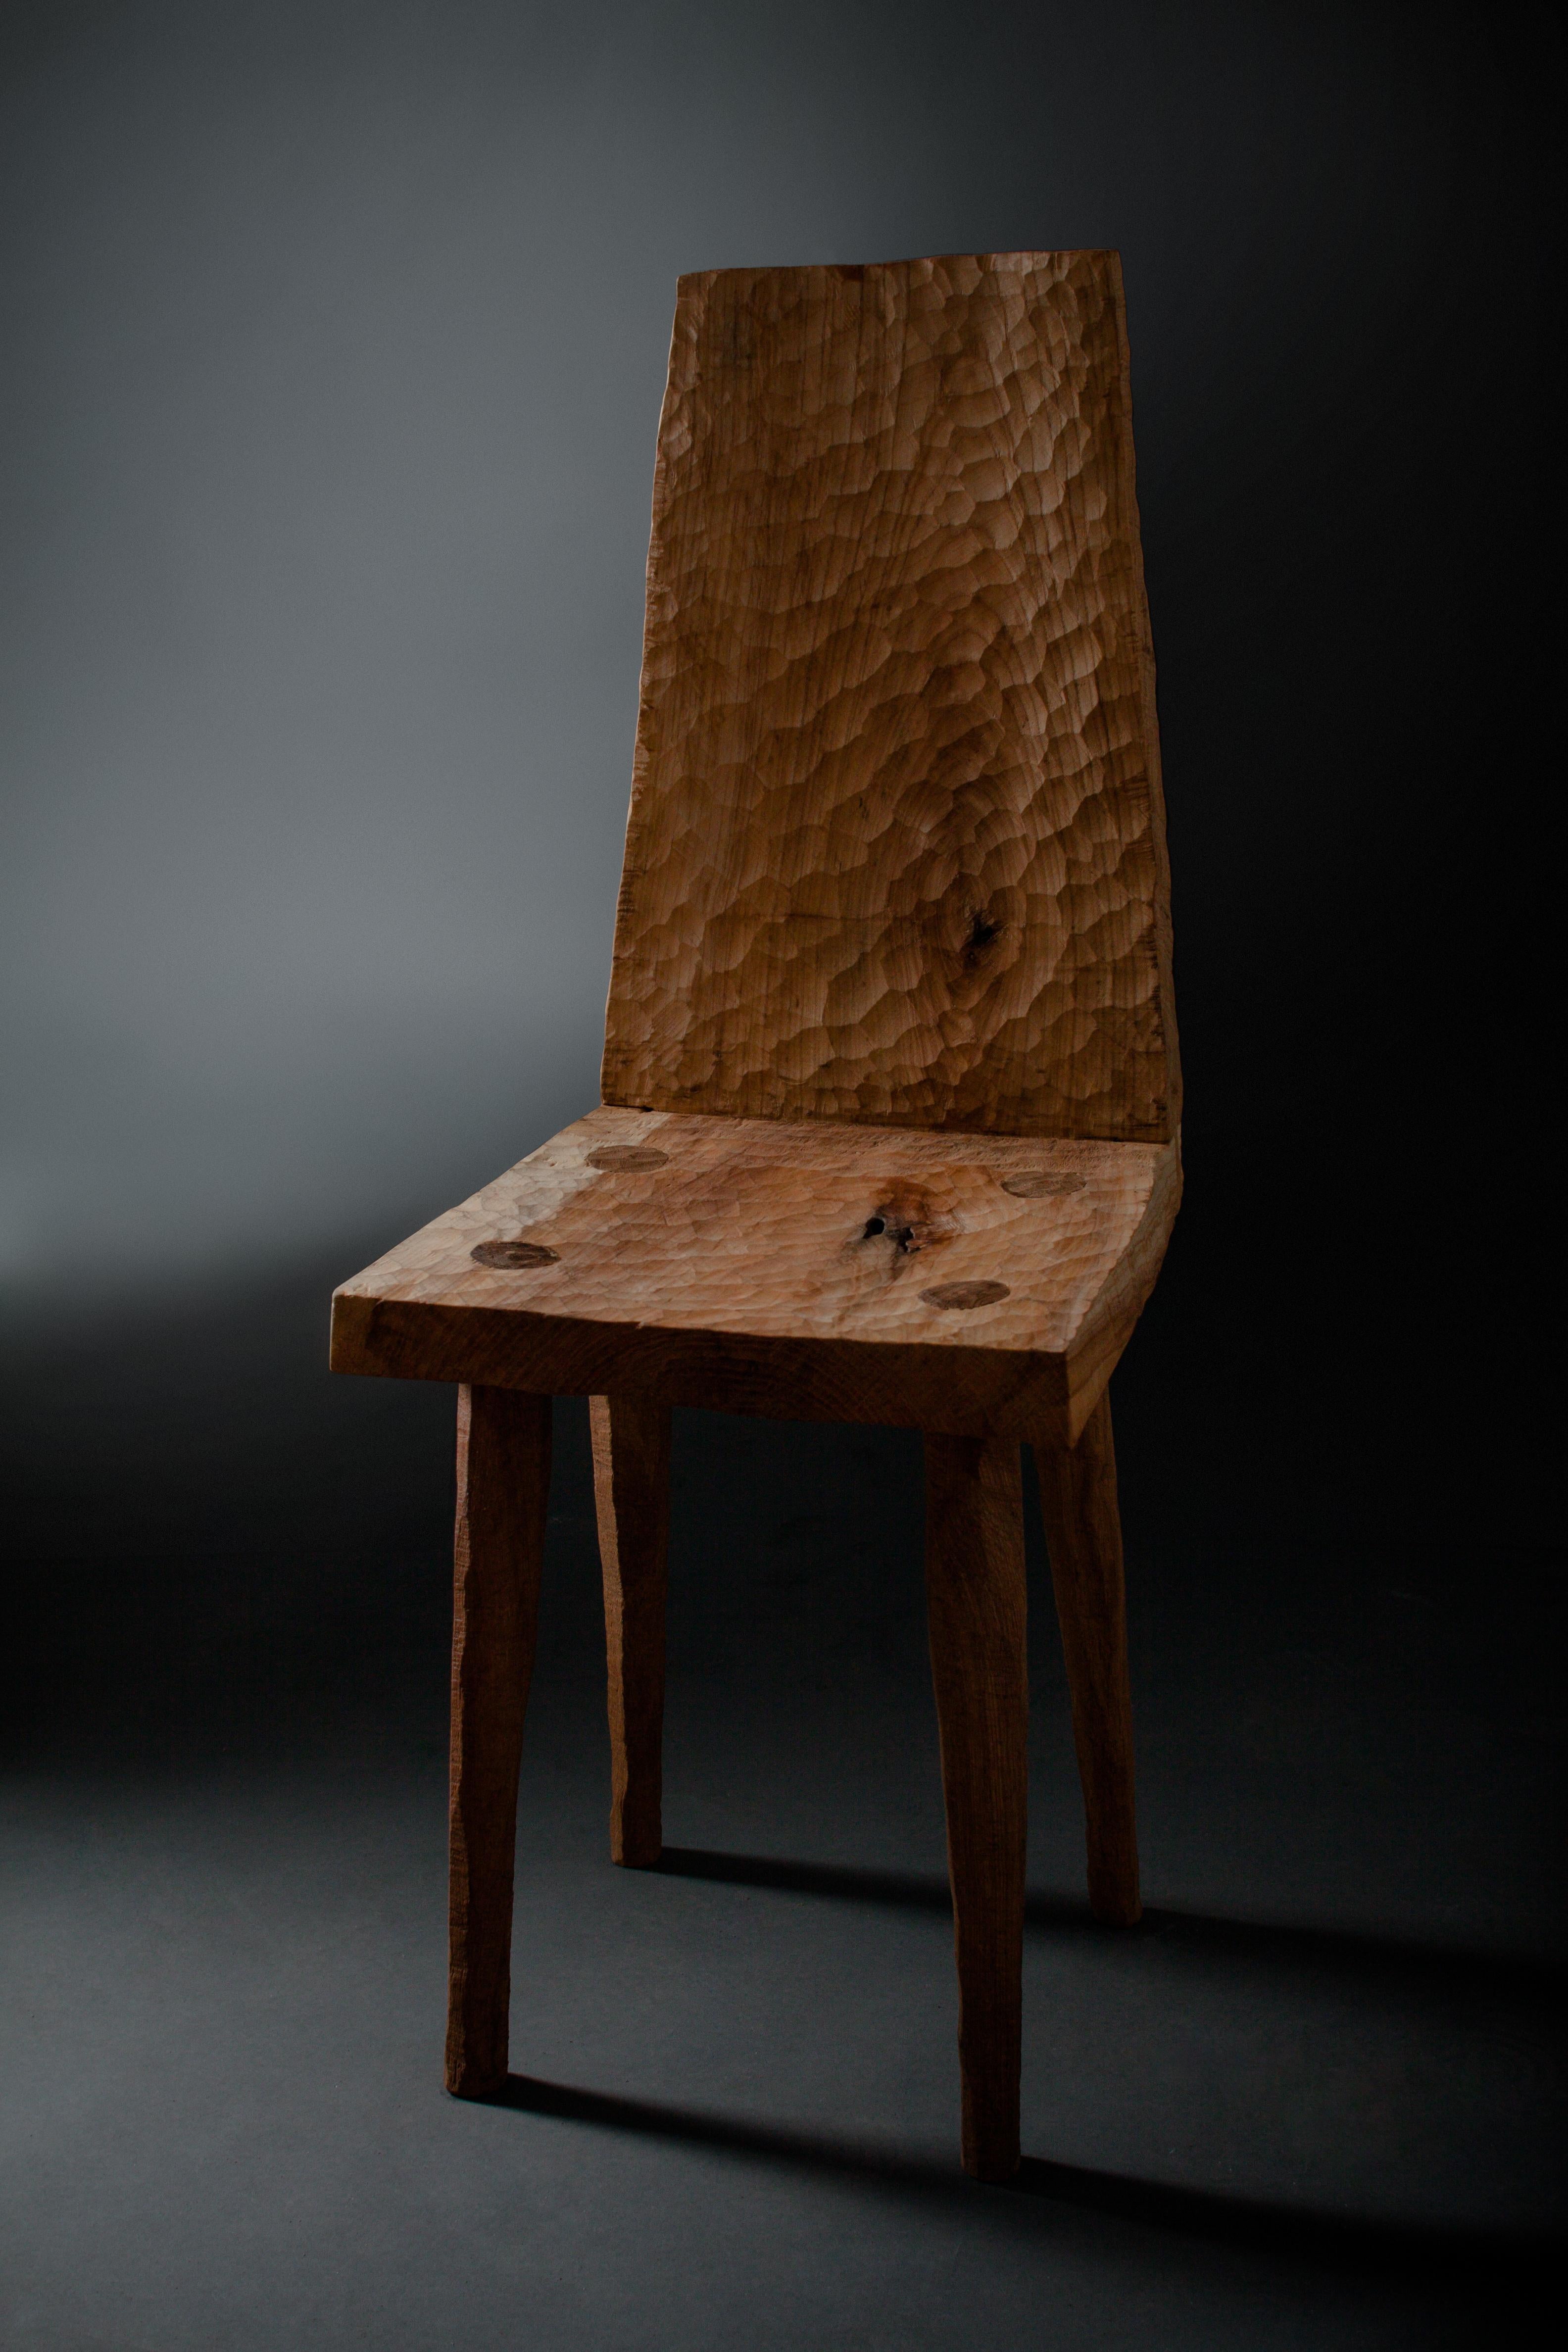 Chair made of solid oak (+ linseed oil)
(Outdoor use OK)

Dimensions: H. 82 x 48 x 48 cm (SH 45 cm)

Warm furniture’s made by Russian designer Denis Milovanov from 